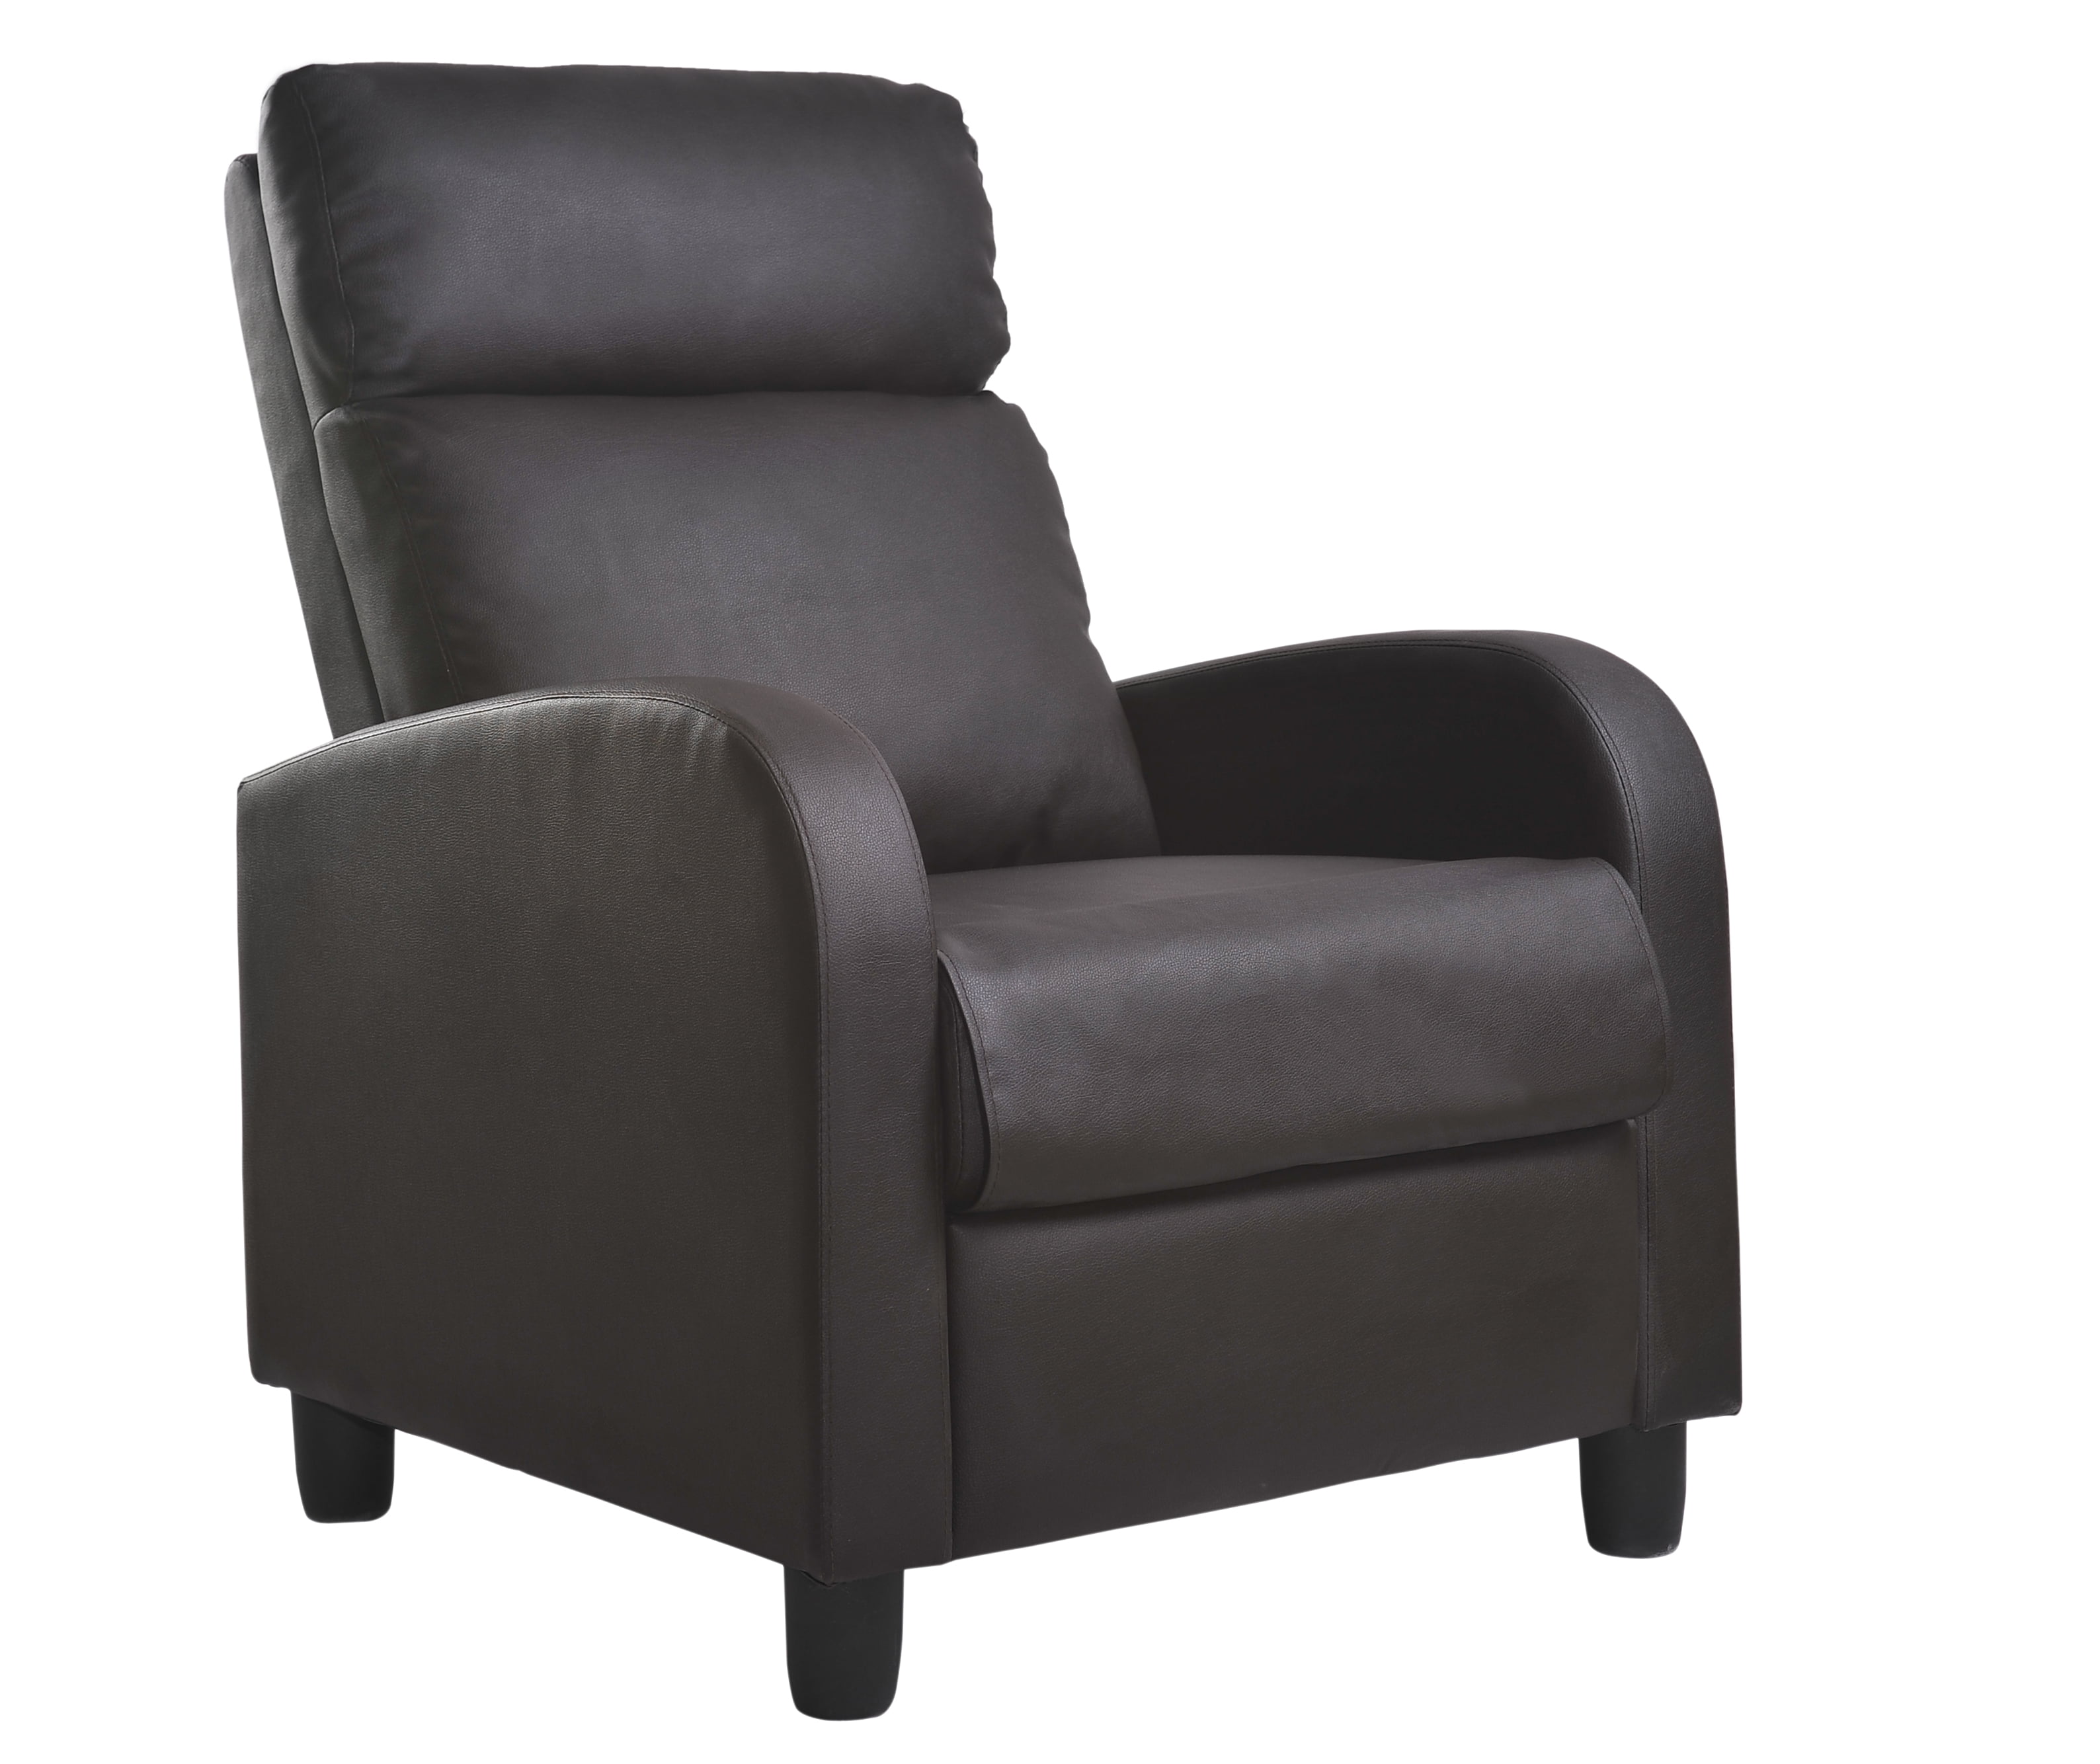 Nathaniel Home Anabelle Faux Leather Recliner, Multiple Colors